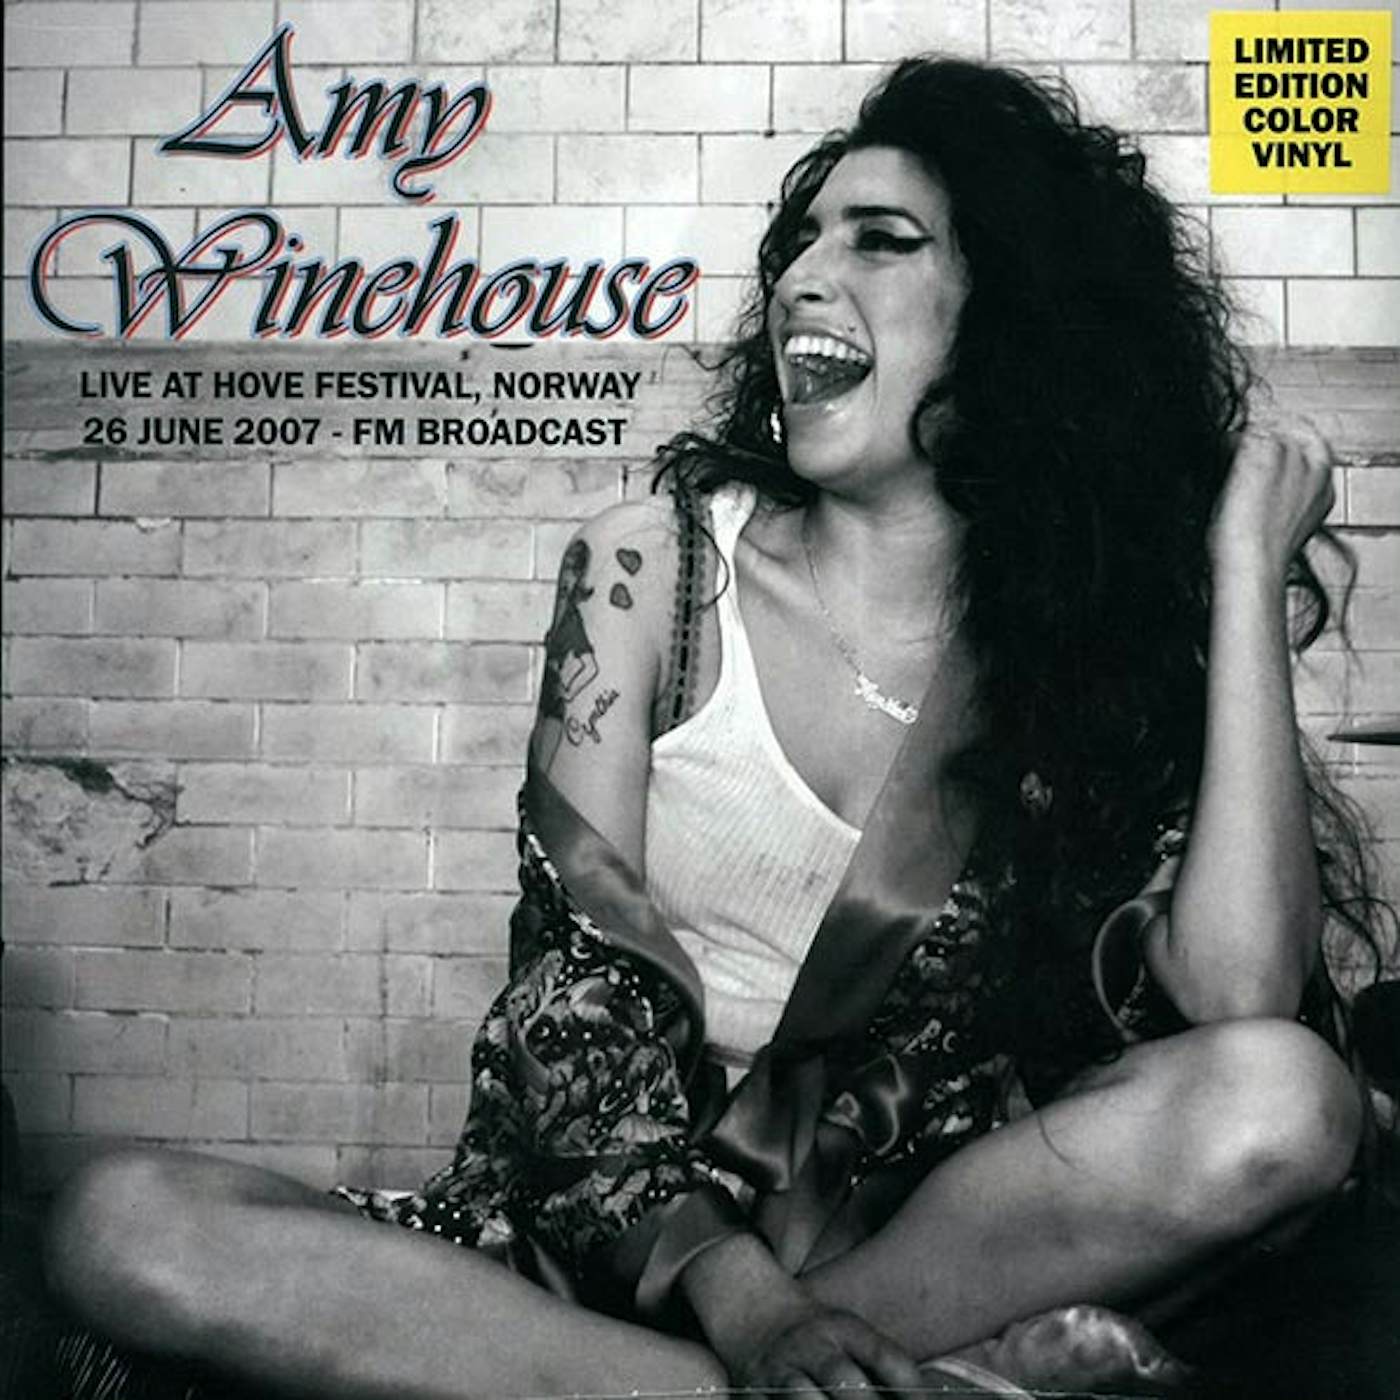 Amy Winehouse LP - Live At Hove Festival, Norway, 26 June 2007 FM Broadcast  (colored vinyl)